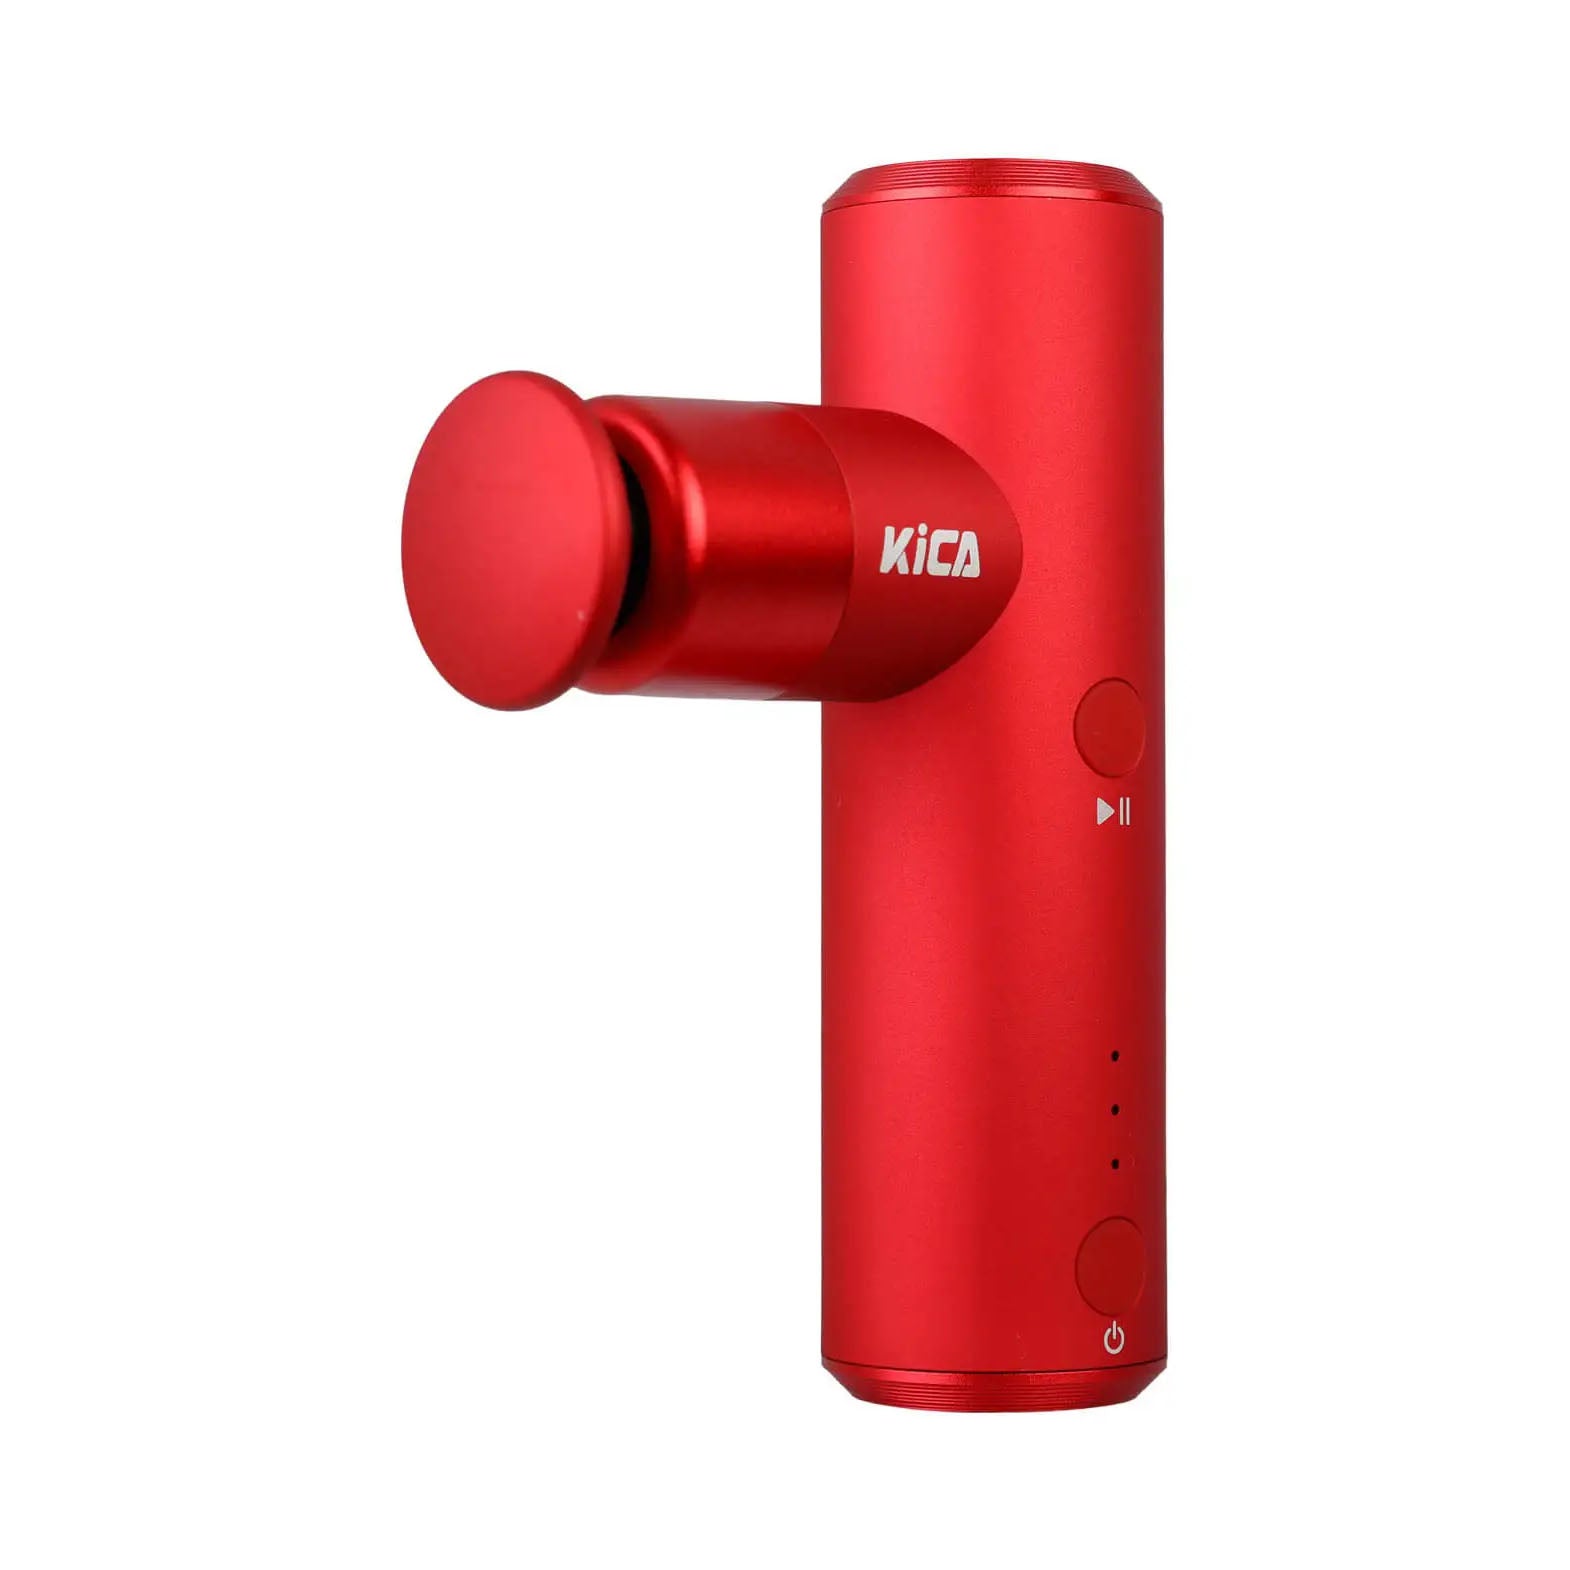 KICA Jet Fan 2 in vibrant red Available at our ecommerce electronics store in India Ideal for tech enthusiasts and gadget lovers seeking high-performance portable fans